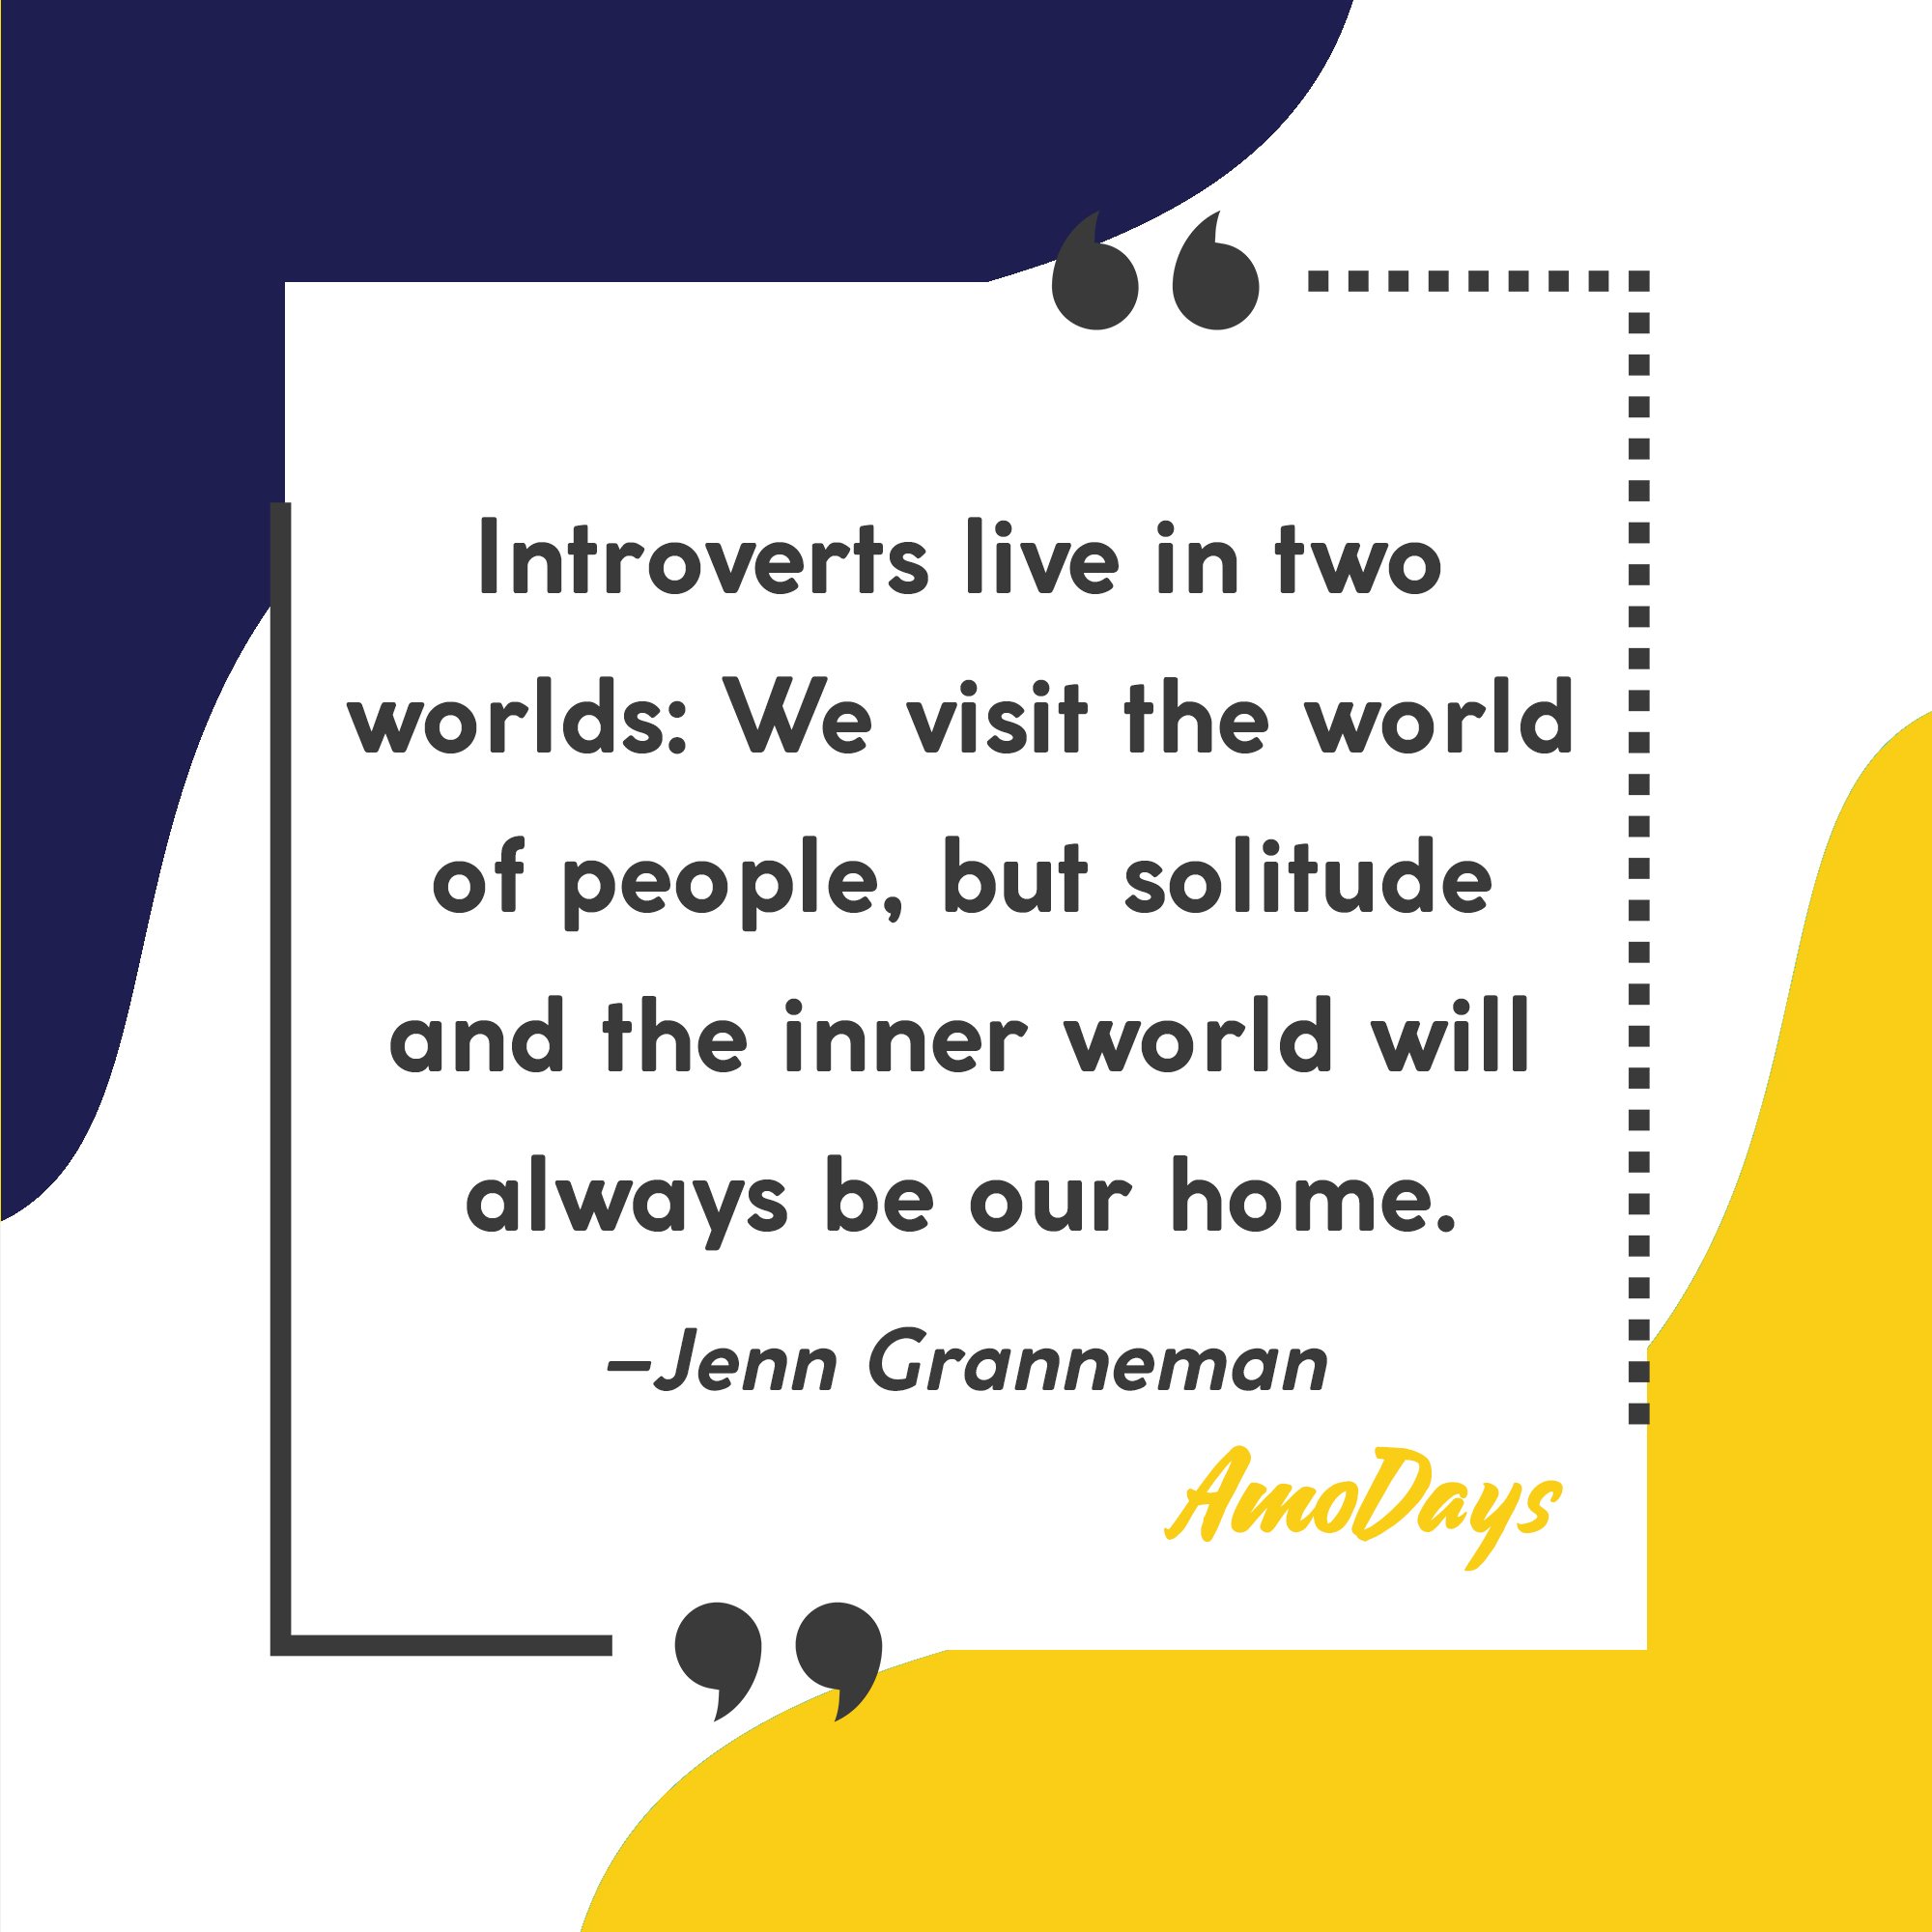 Jenn Granneman's quote "Introverts live in two worlds: We visit the world of people, but solitude and the inner world will always be our home."  | Image: AmoDays